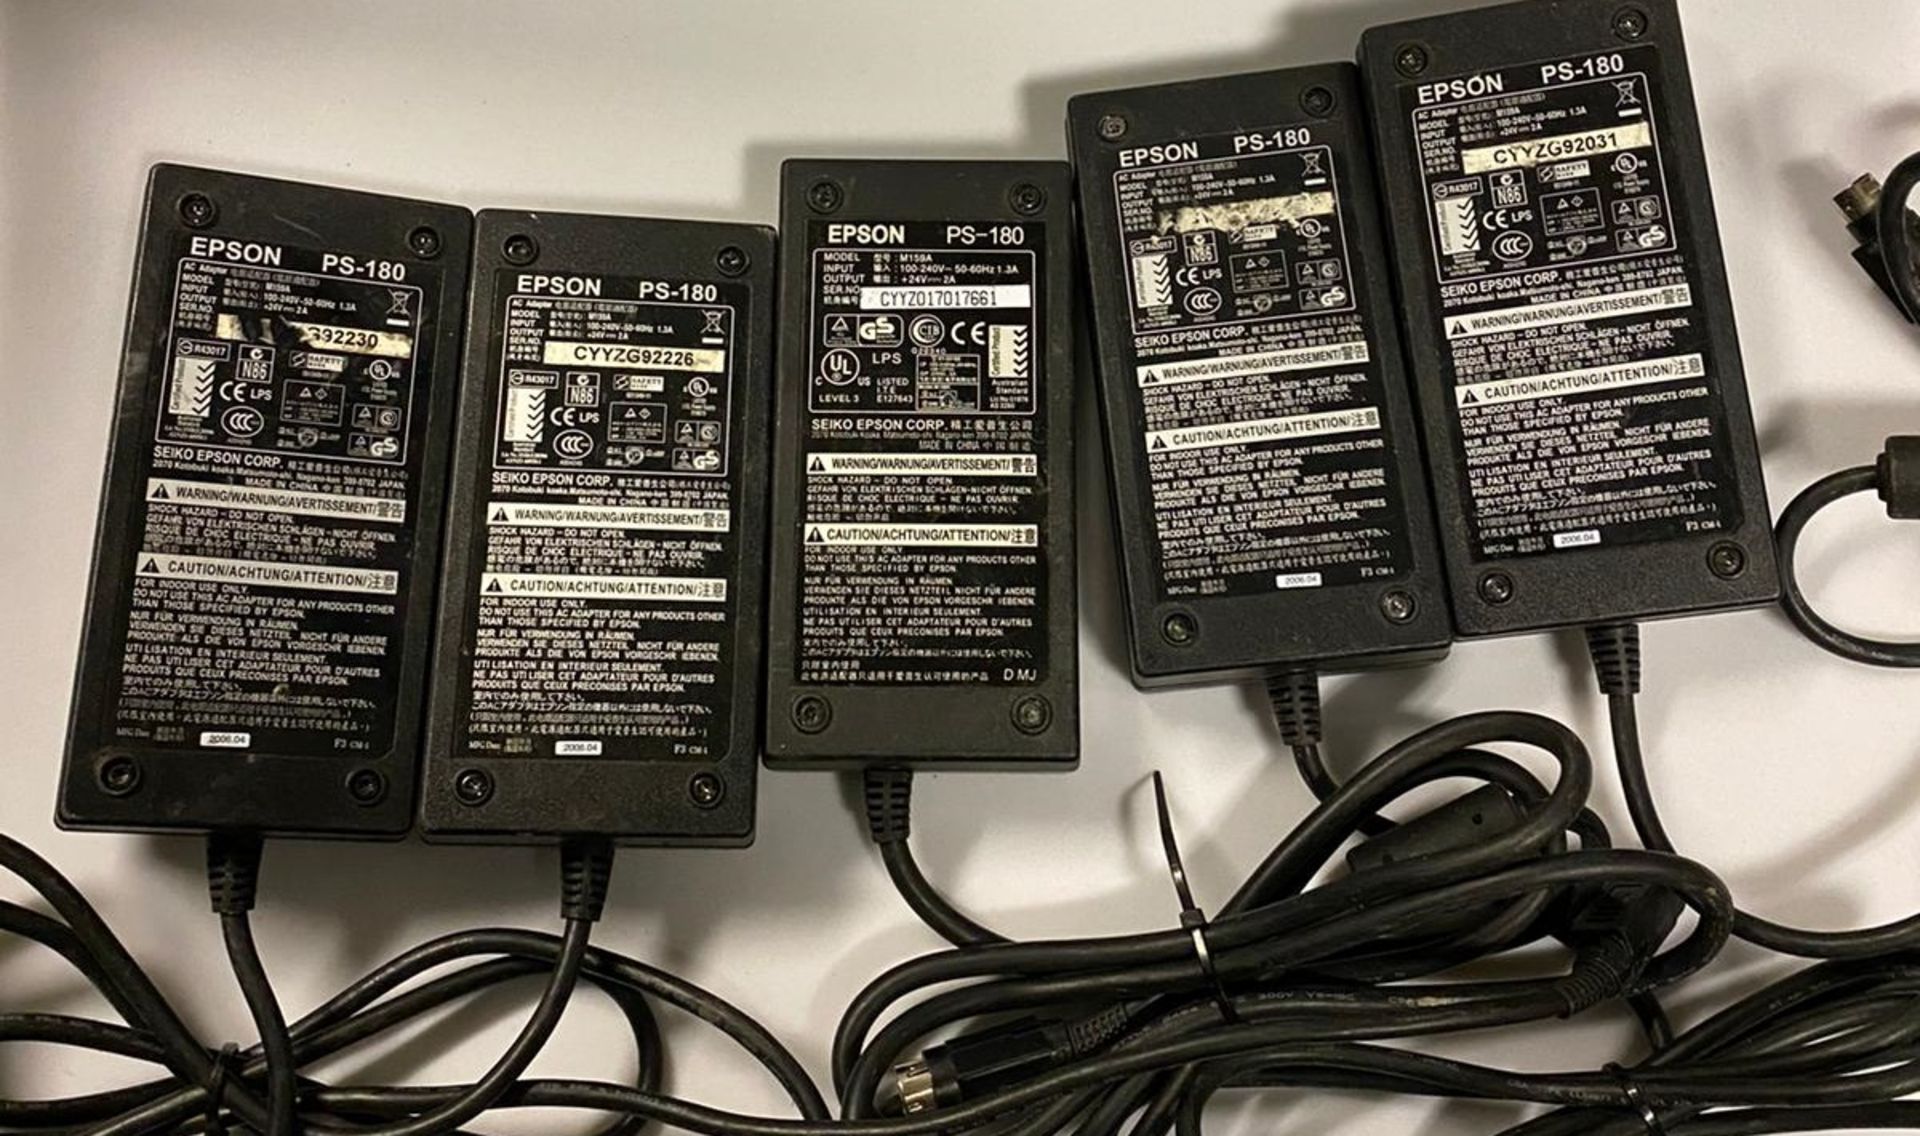 7 x Epson PS-180 Power Supplies For Epos Receipt Printers and More - Used condition - Ref WH2 - Image 2 of 5